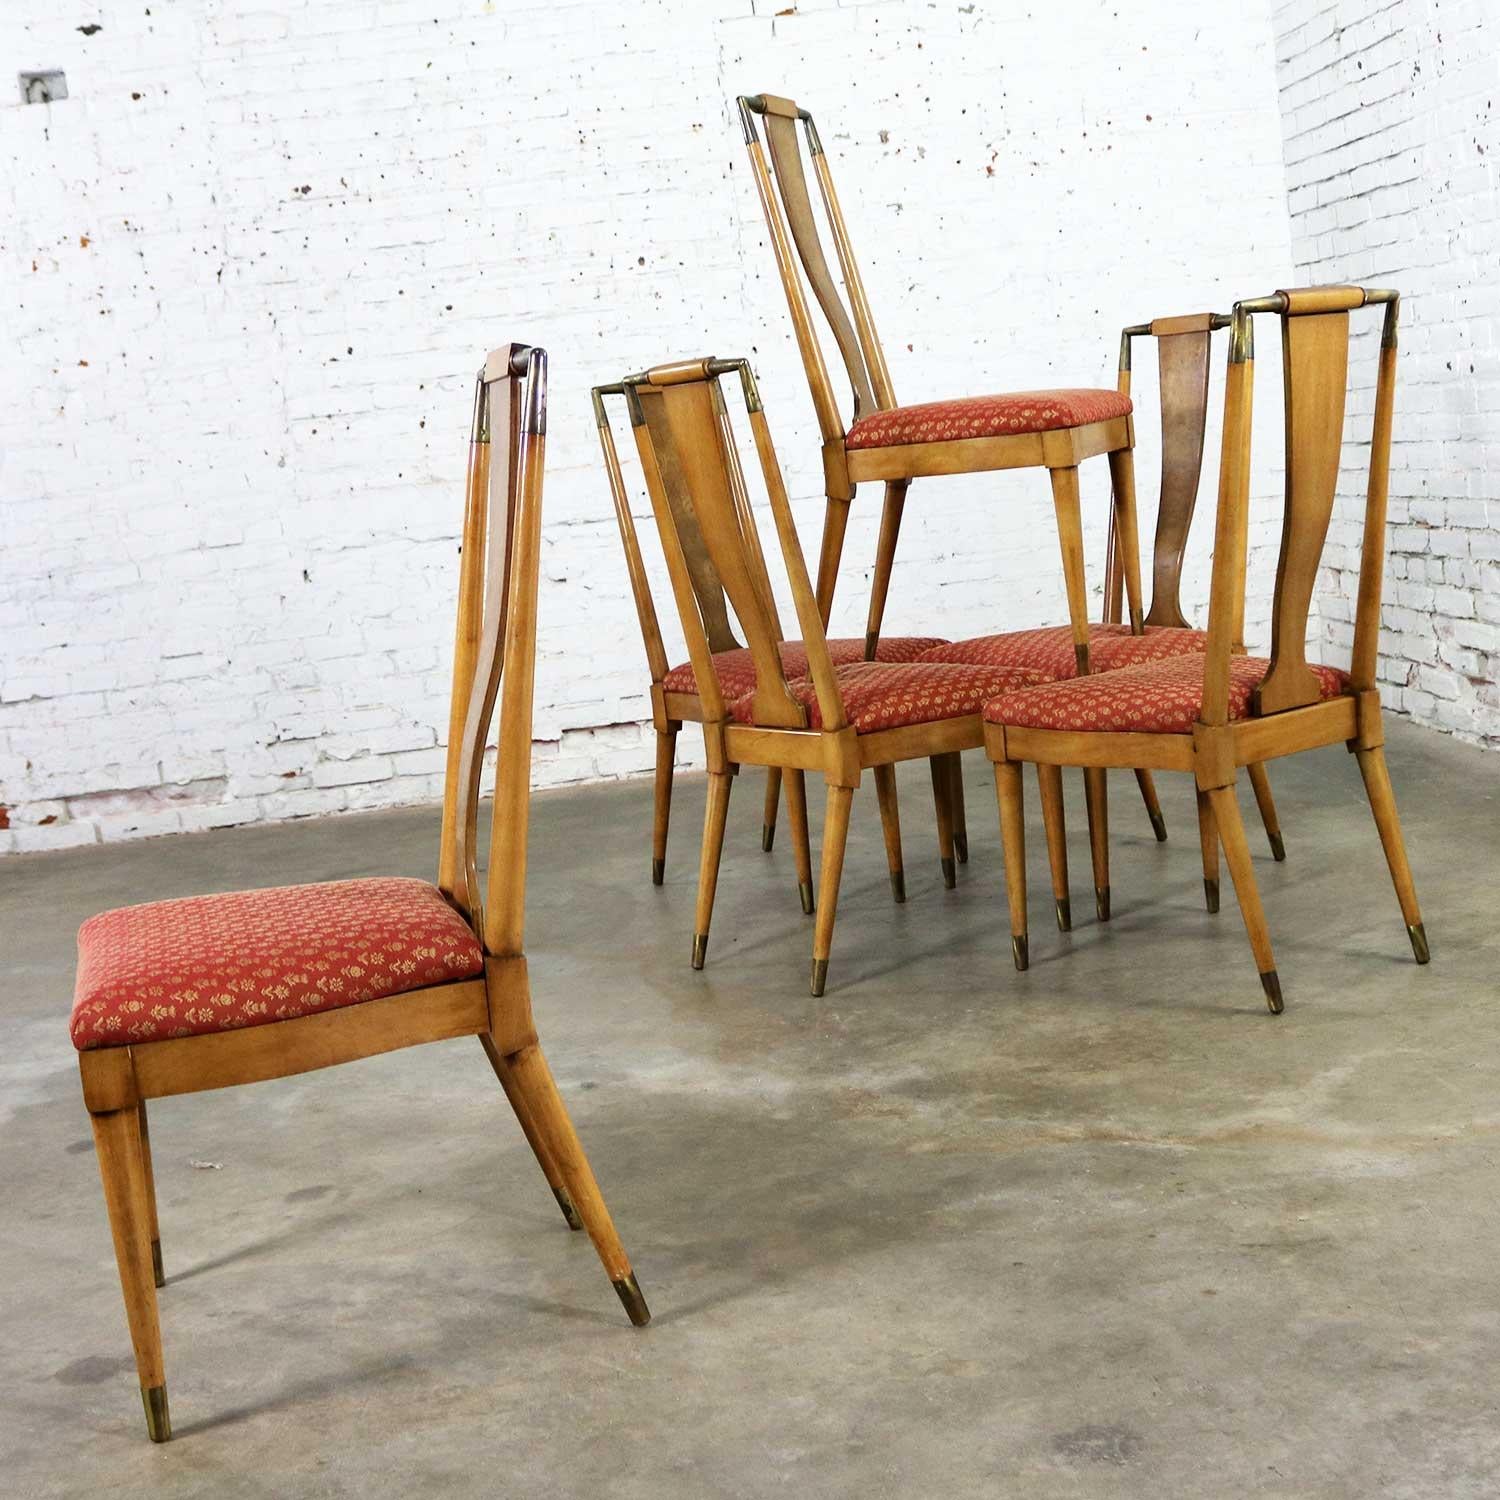 American Midcentury Contempora Dining Chairs by William Clingman for J. L. Metz Set of 6 For Sale